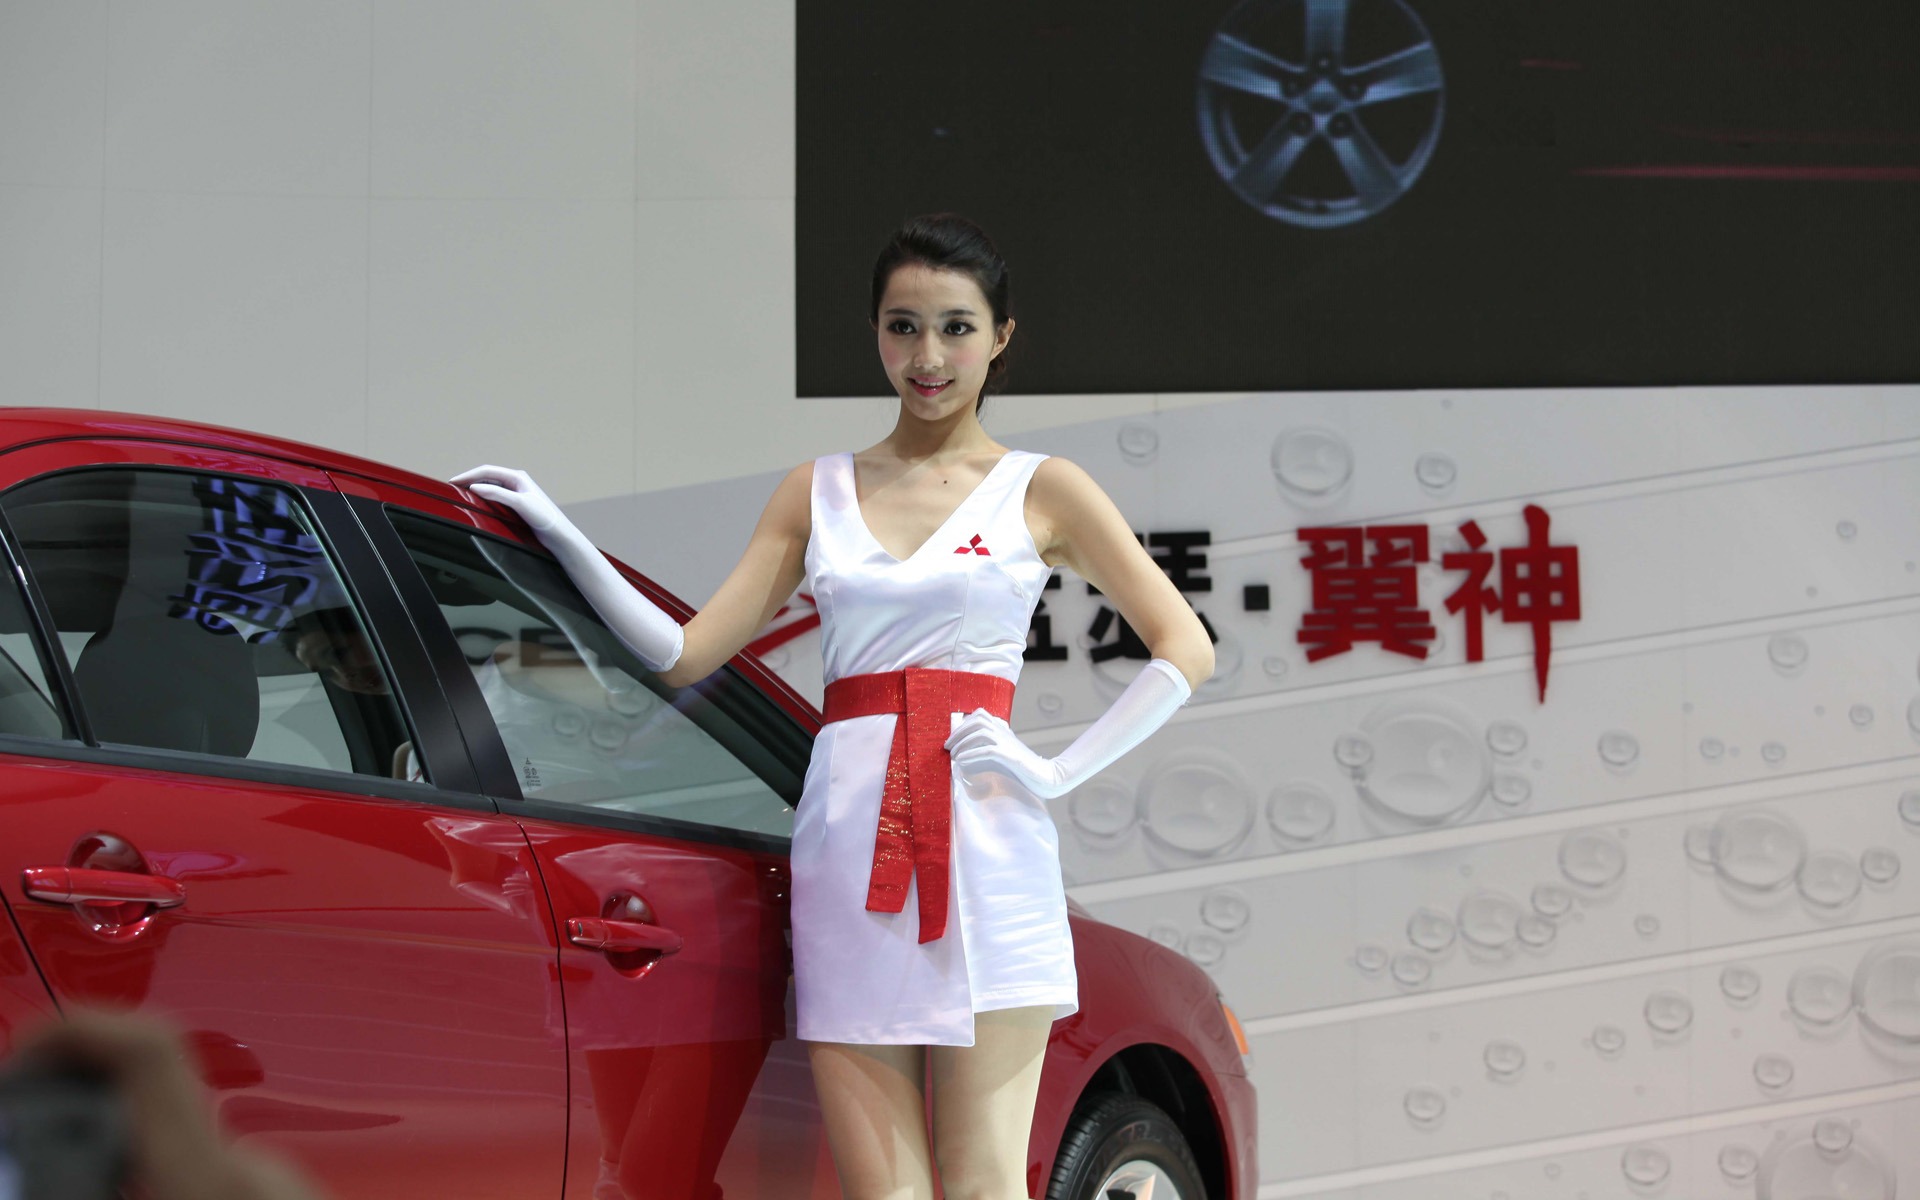 2010 Beijing International Auto Show beauty (2) (the wind chasing the clouds works) #30 - 1920x1200